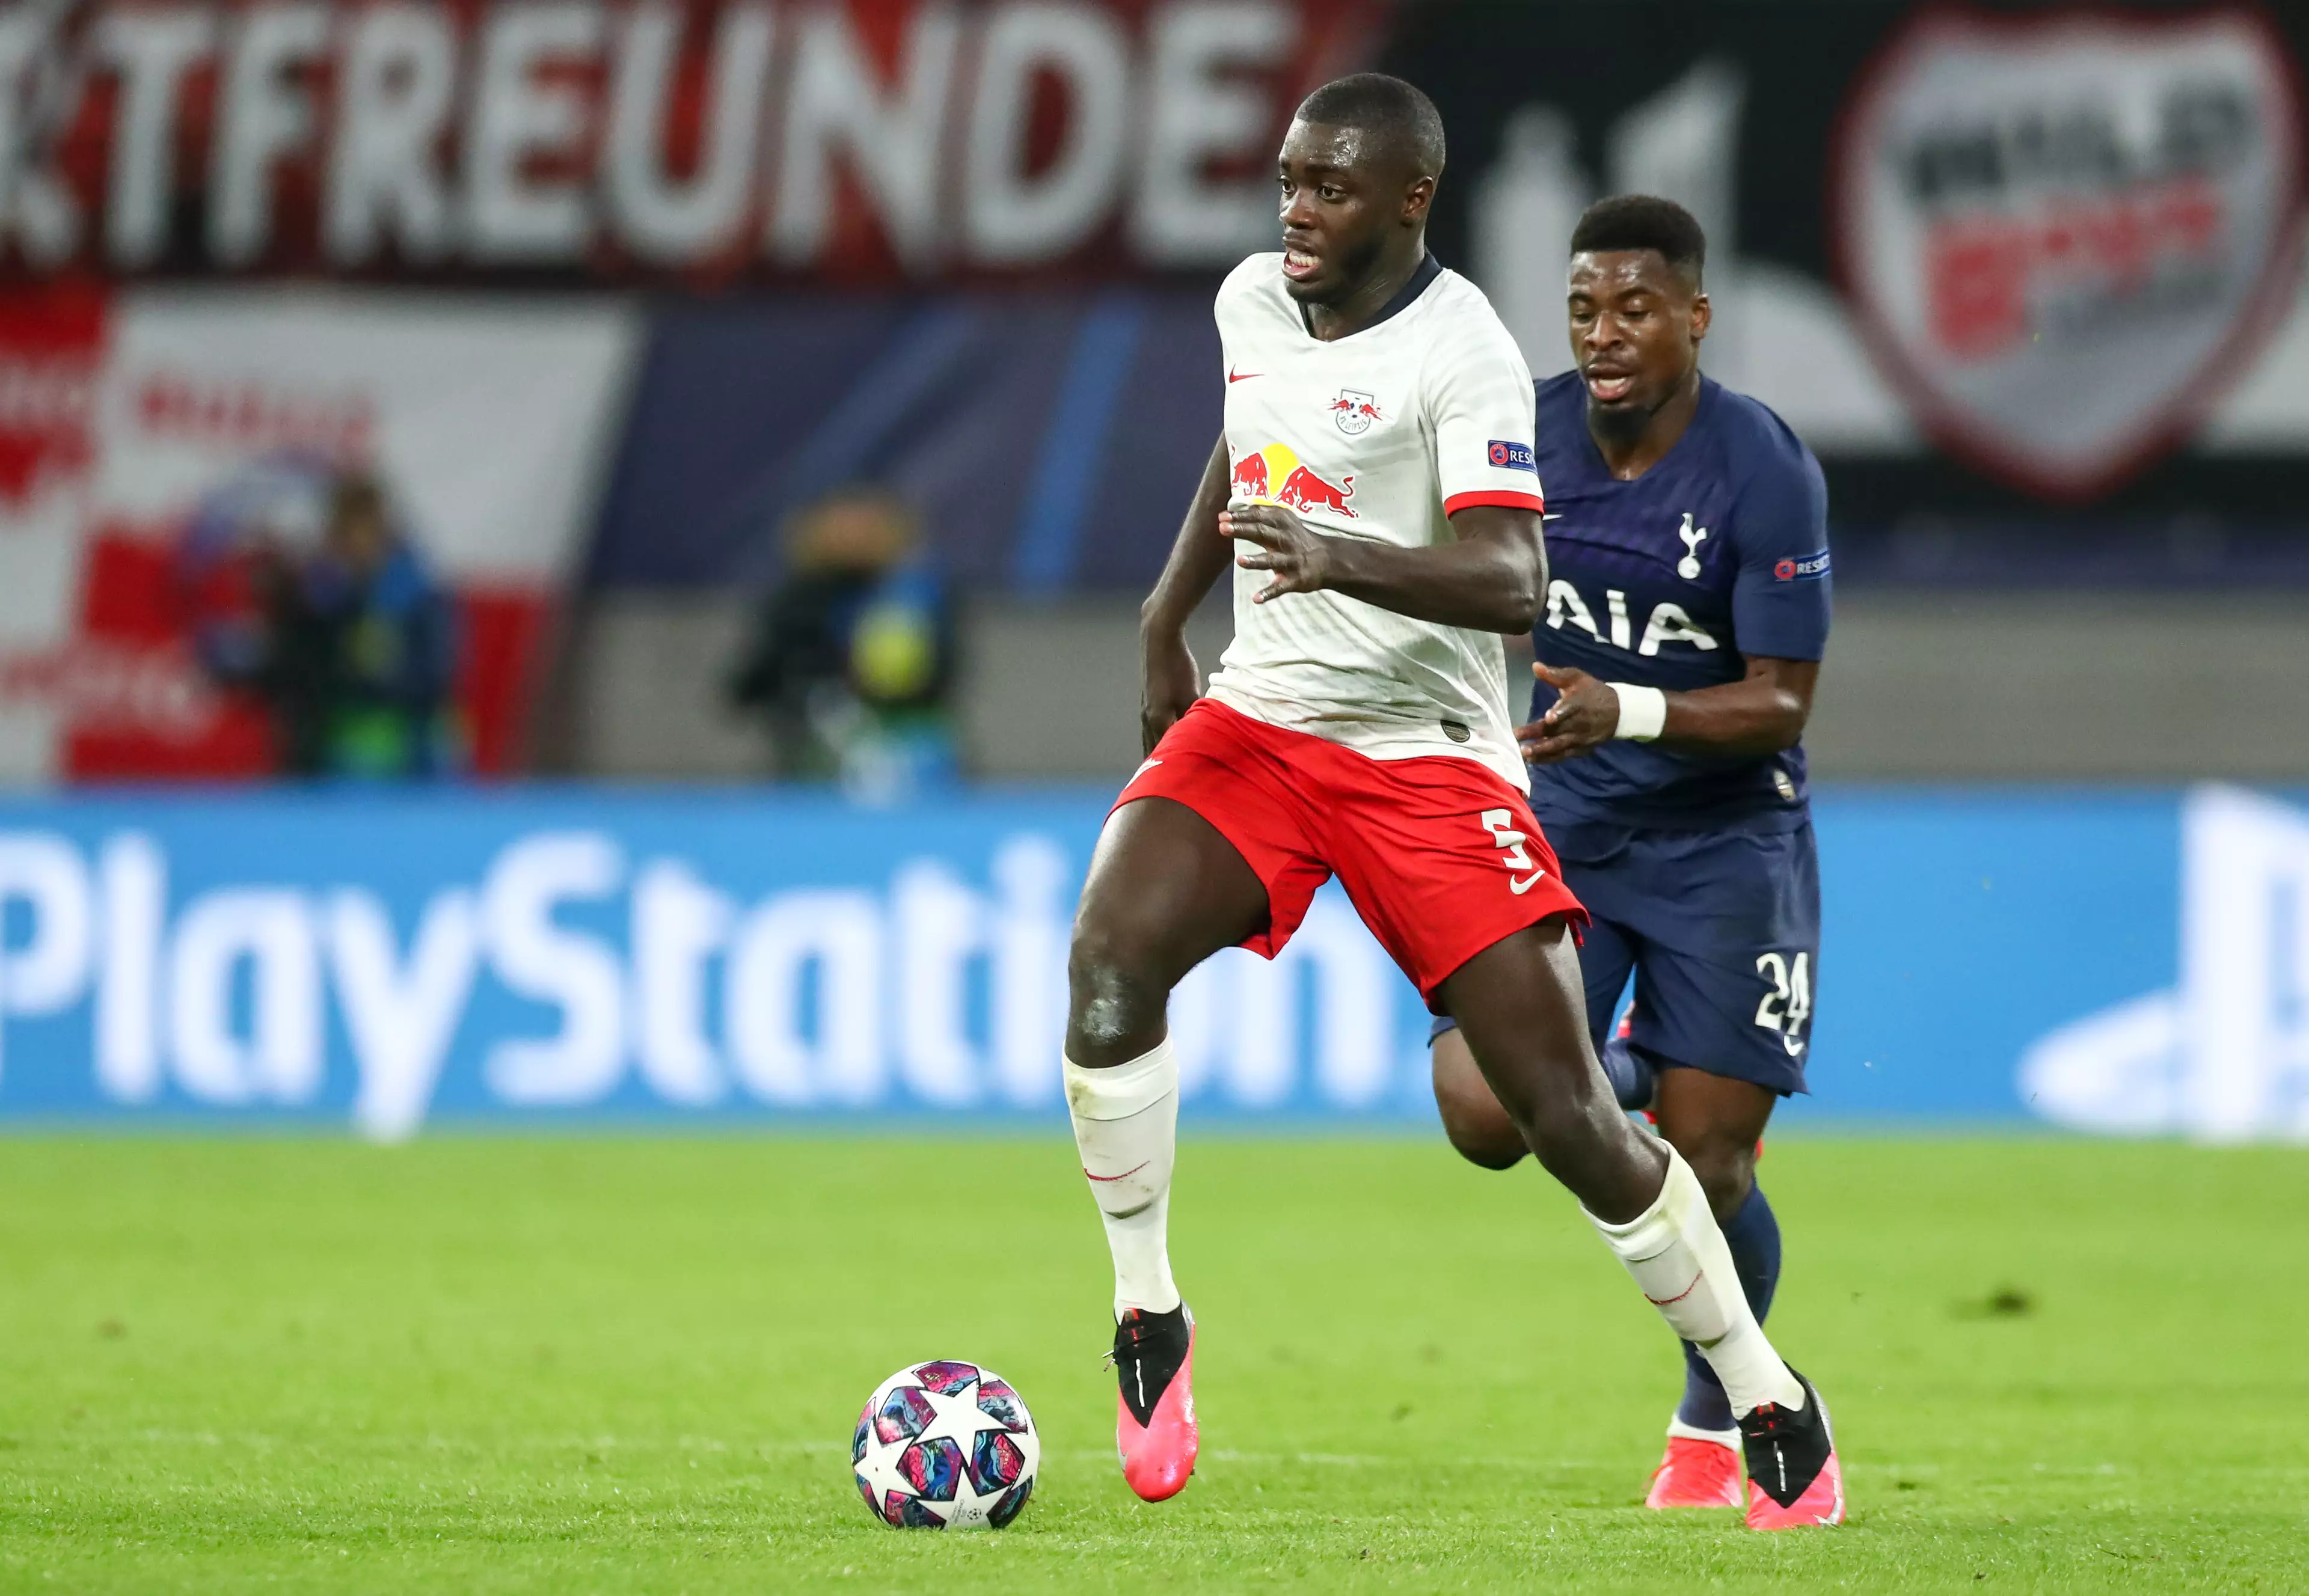 Upamecano impressed earlier in the Champions League against Spurs. Image: PA Images